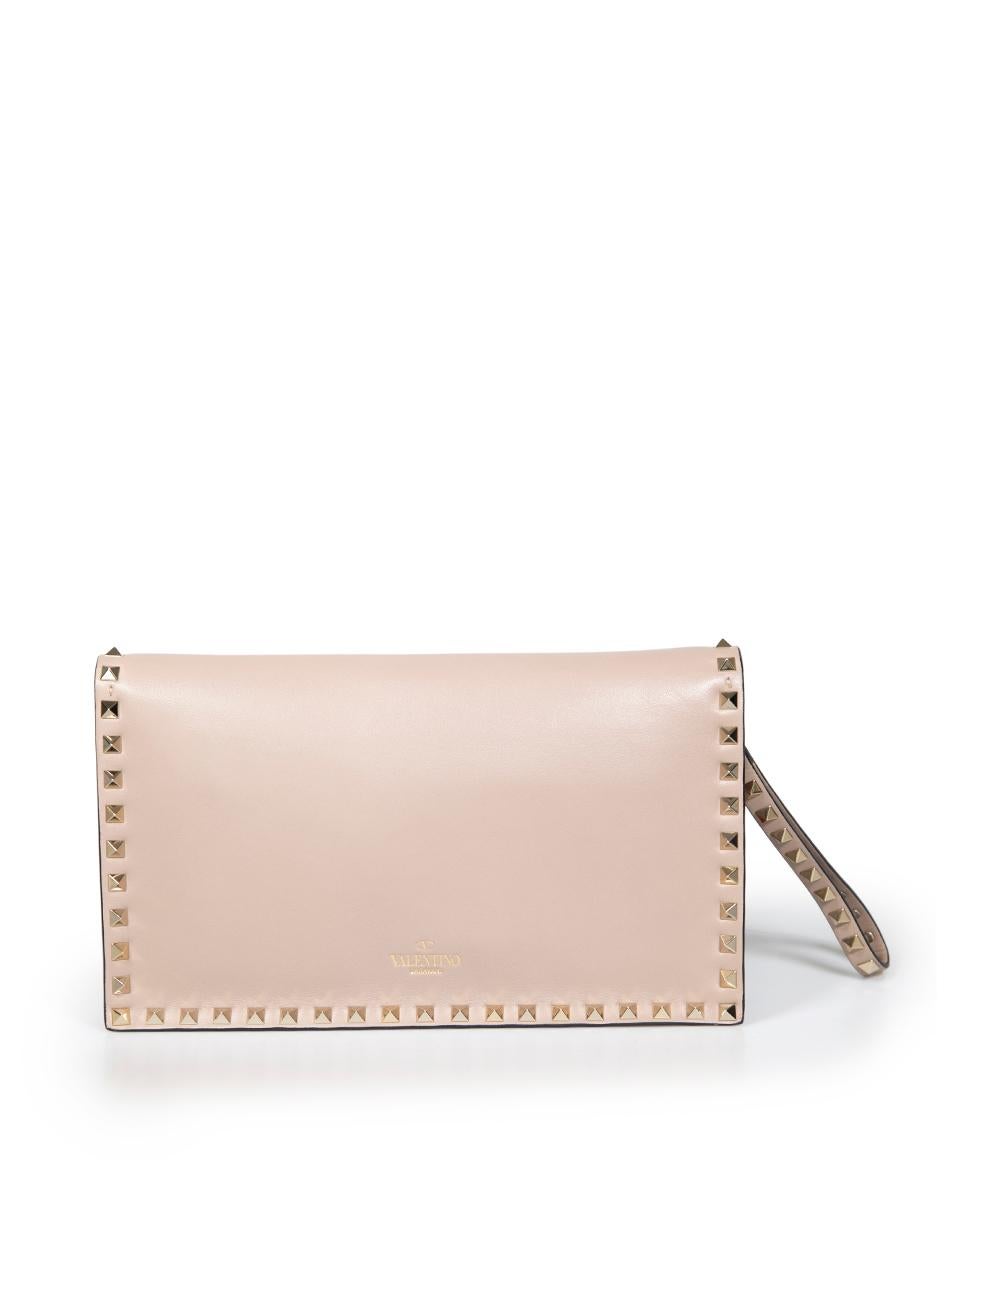 Valentino Beige Leather Rockstud Clutch In Excellent Condition For Sale In London, GB